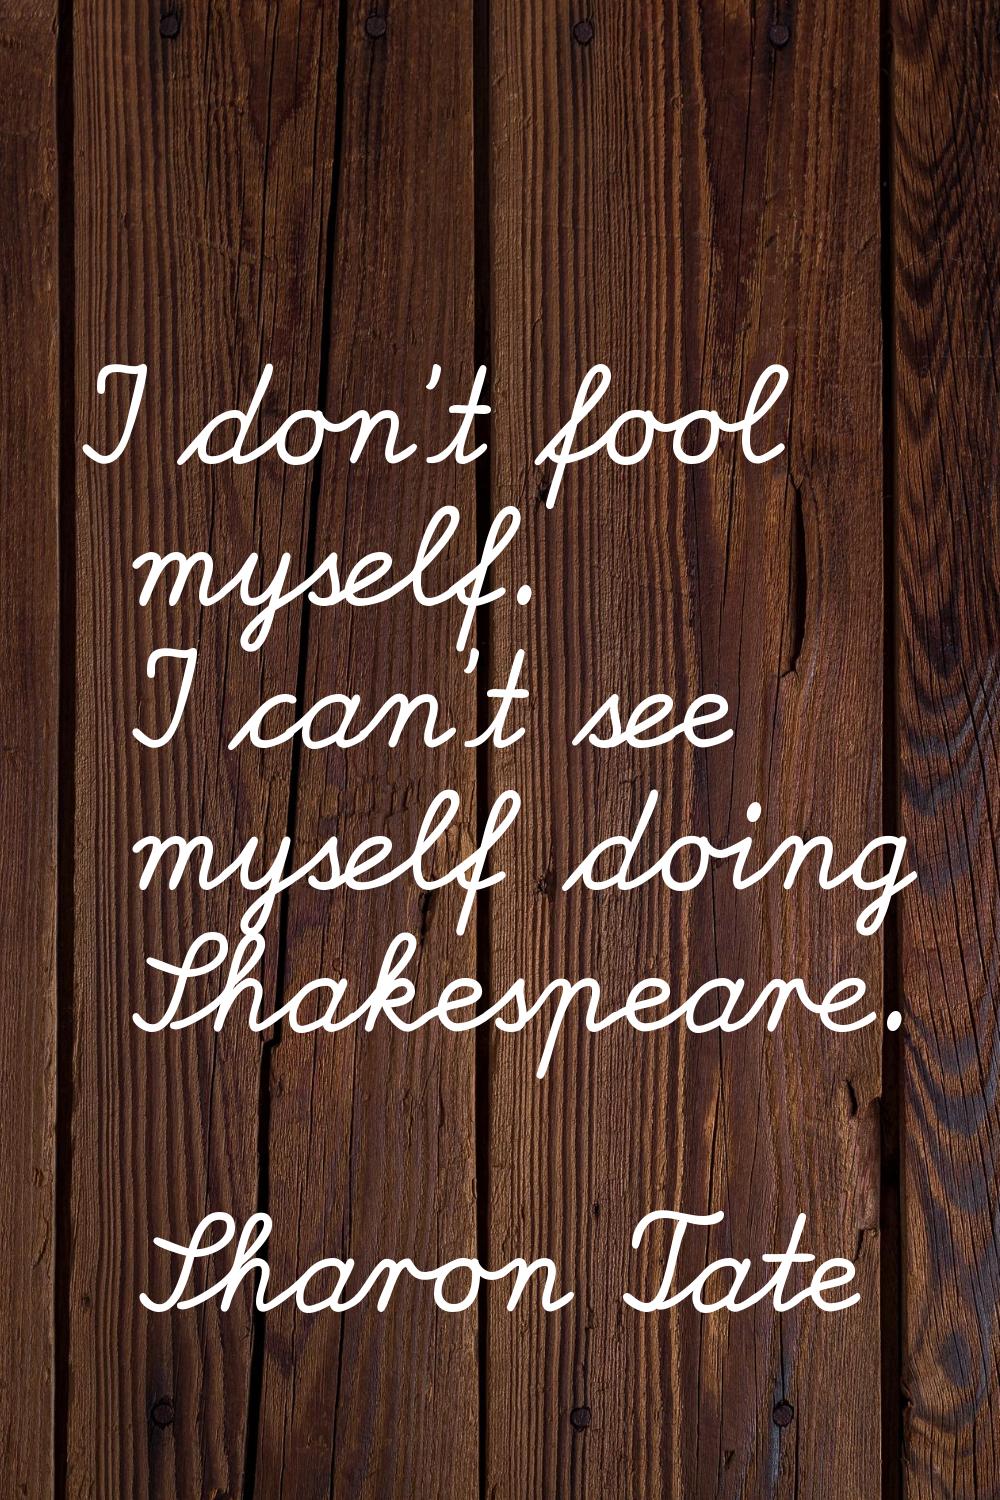 I don't fool myself. I can't see myself doing Shakespeare.